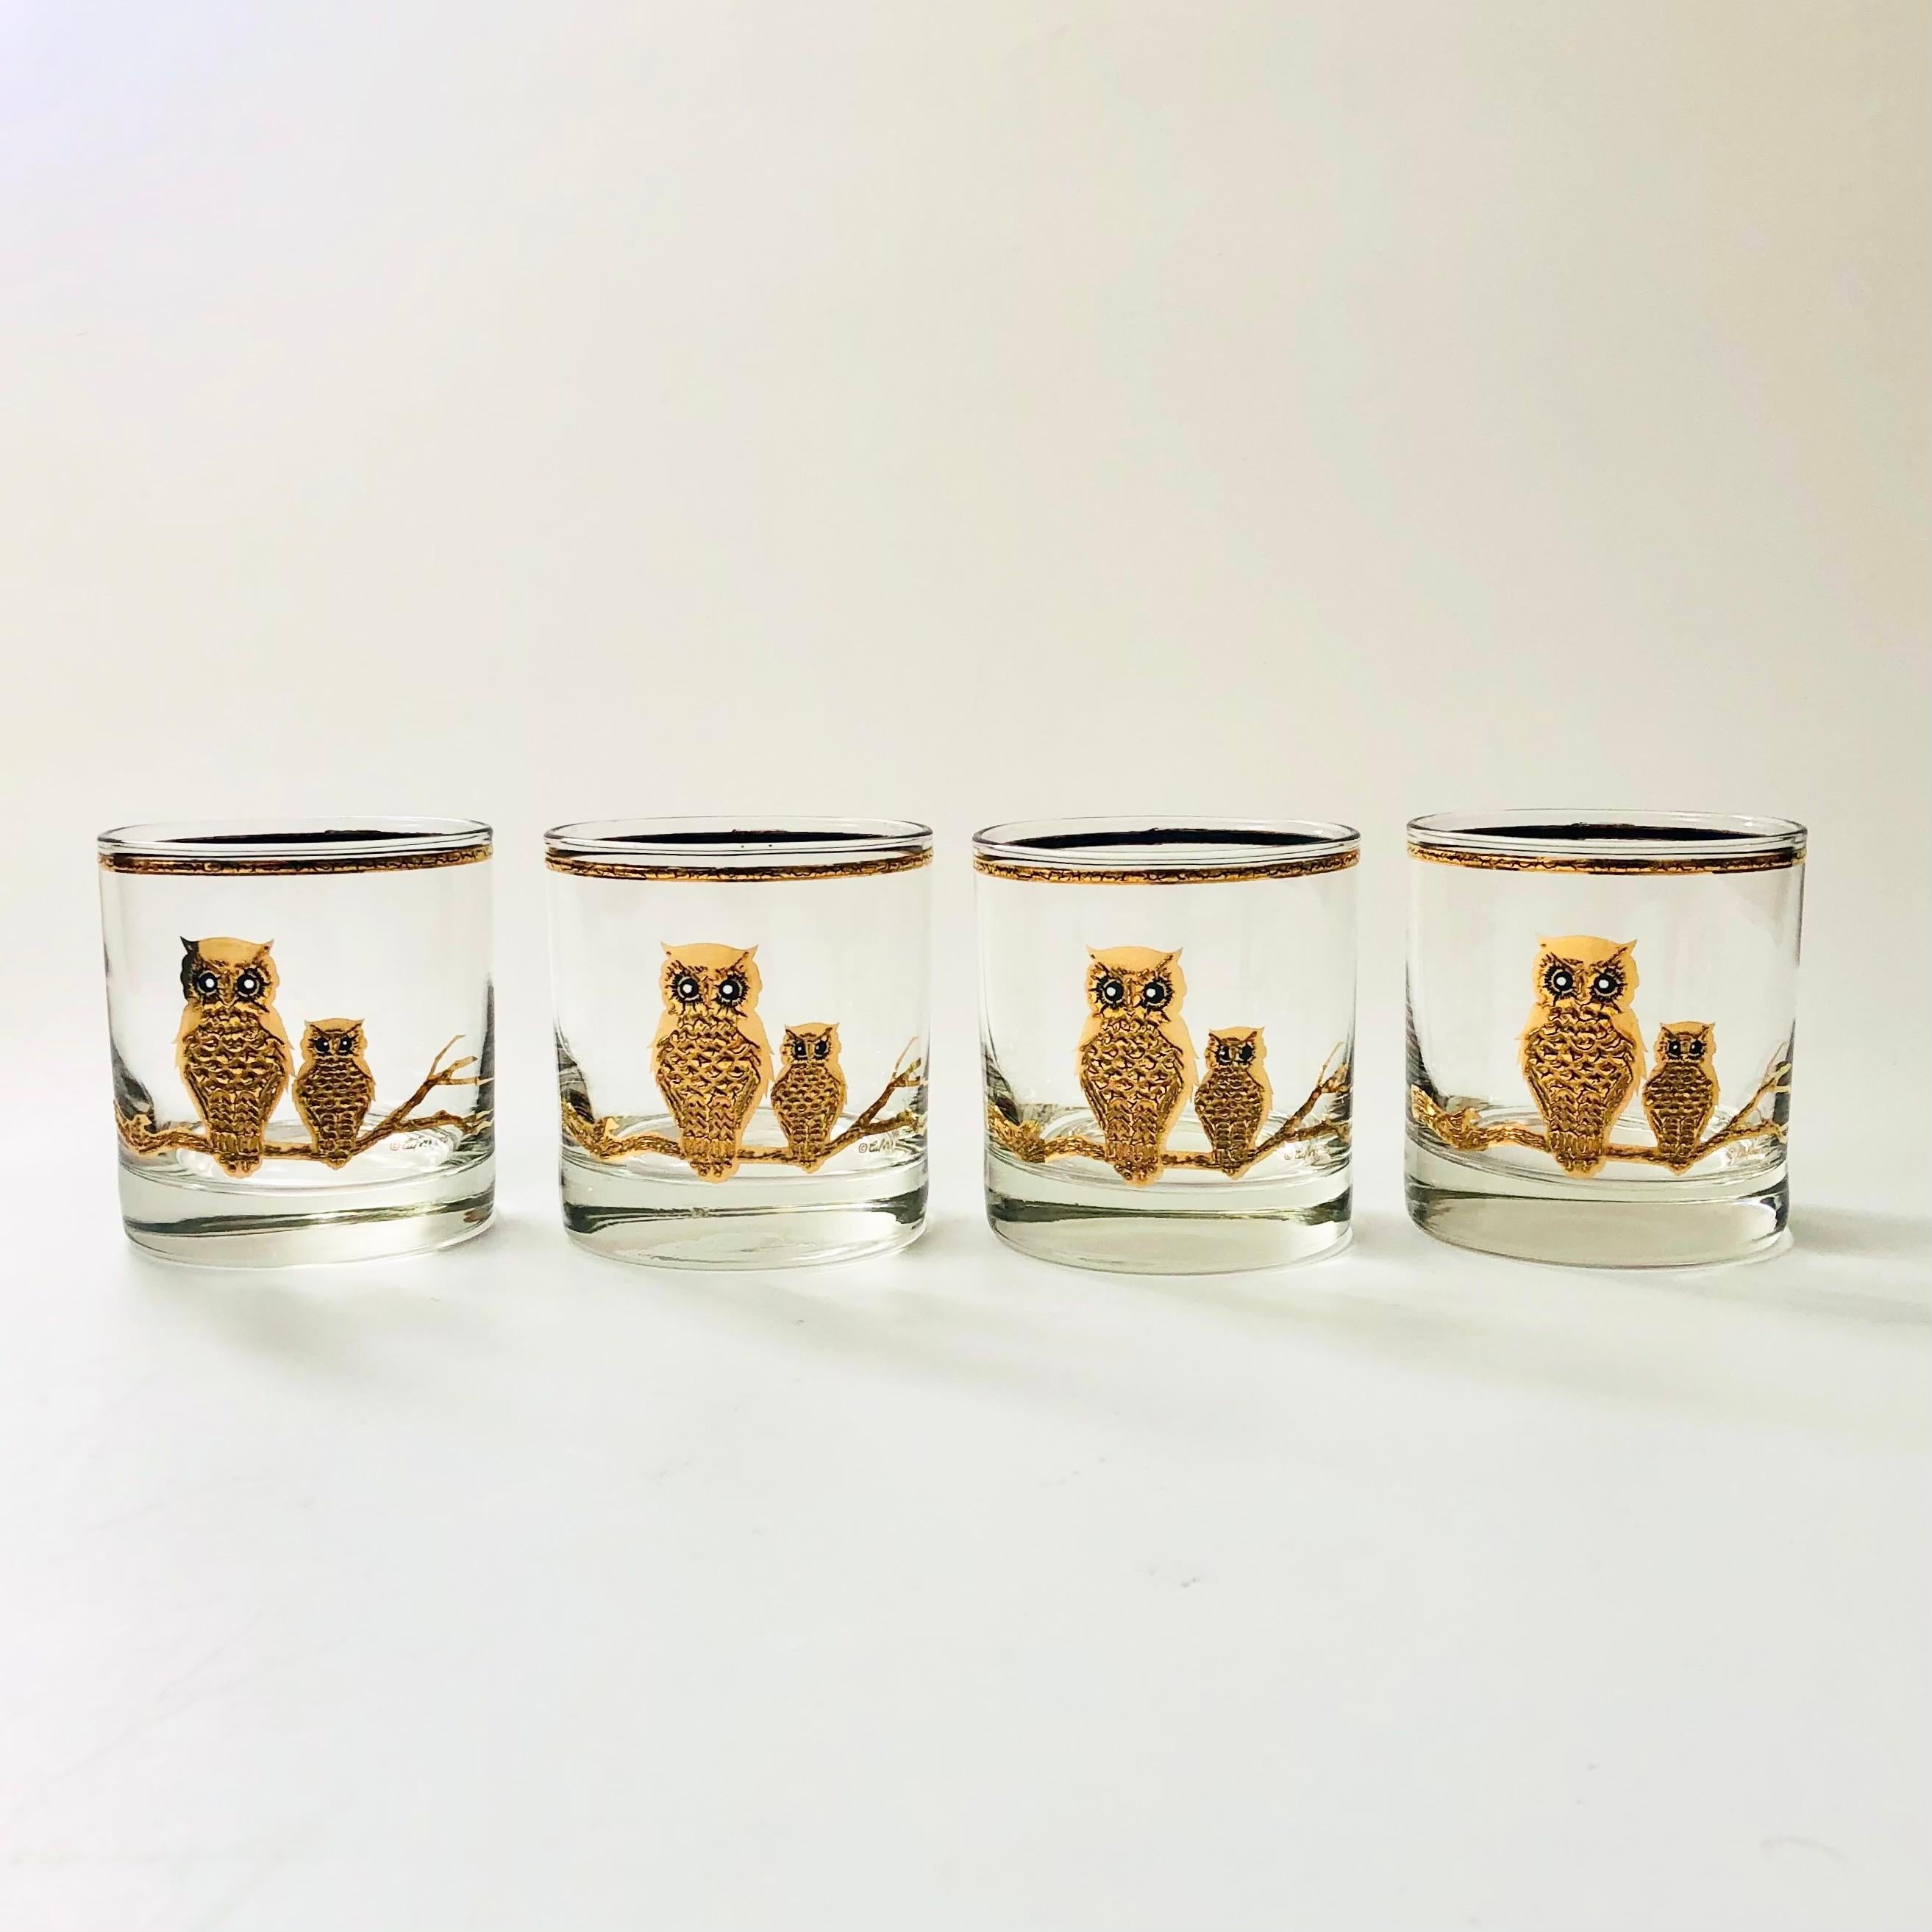 A gorgeous set of 4 mid century lowball tumblers decorated with gold owls. Made by Culver. 
2 sets of 4 are available.

